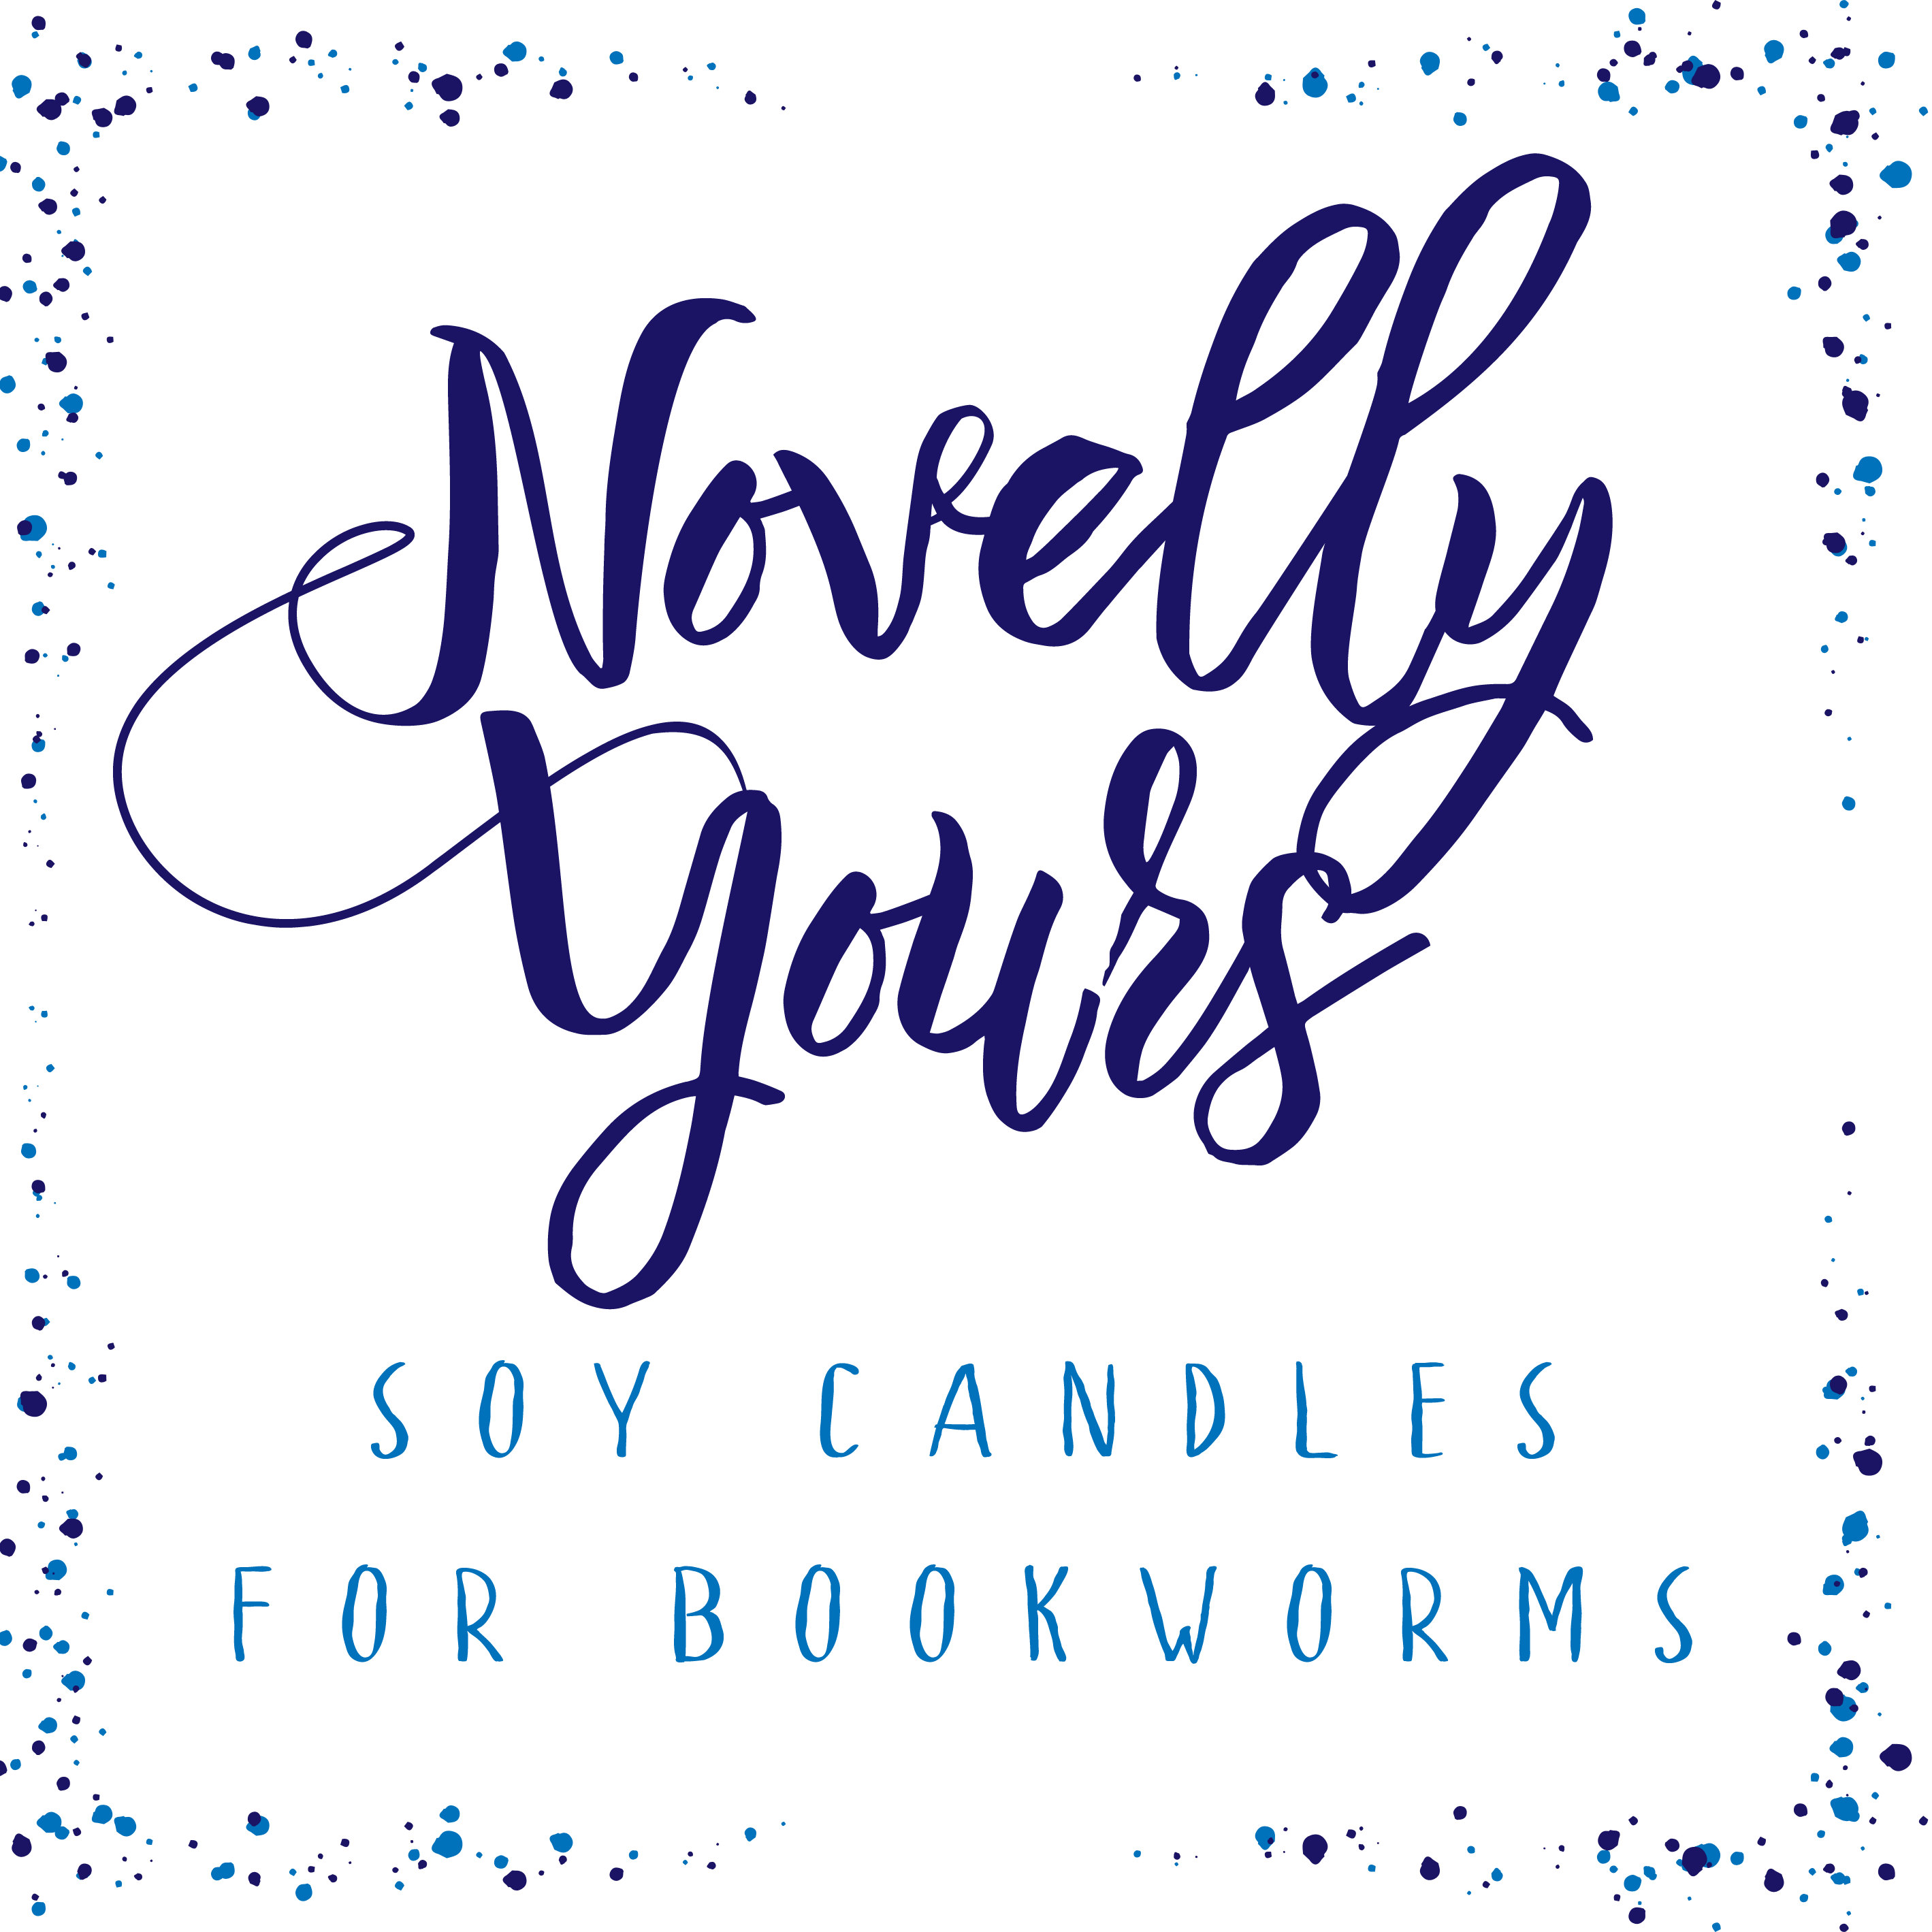 Novelly Yours Candles coupons and promo codes